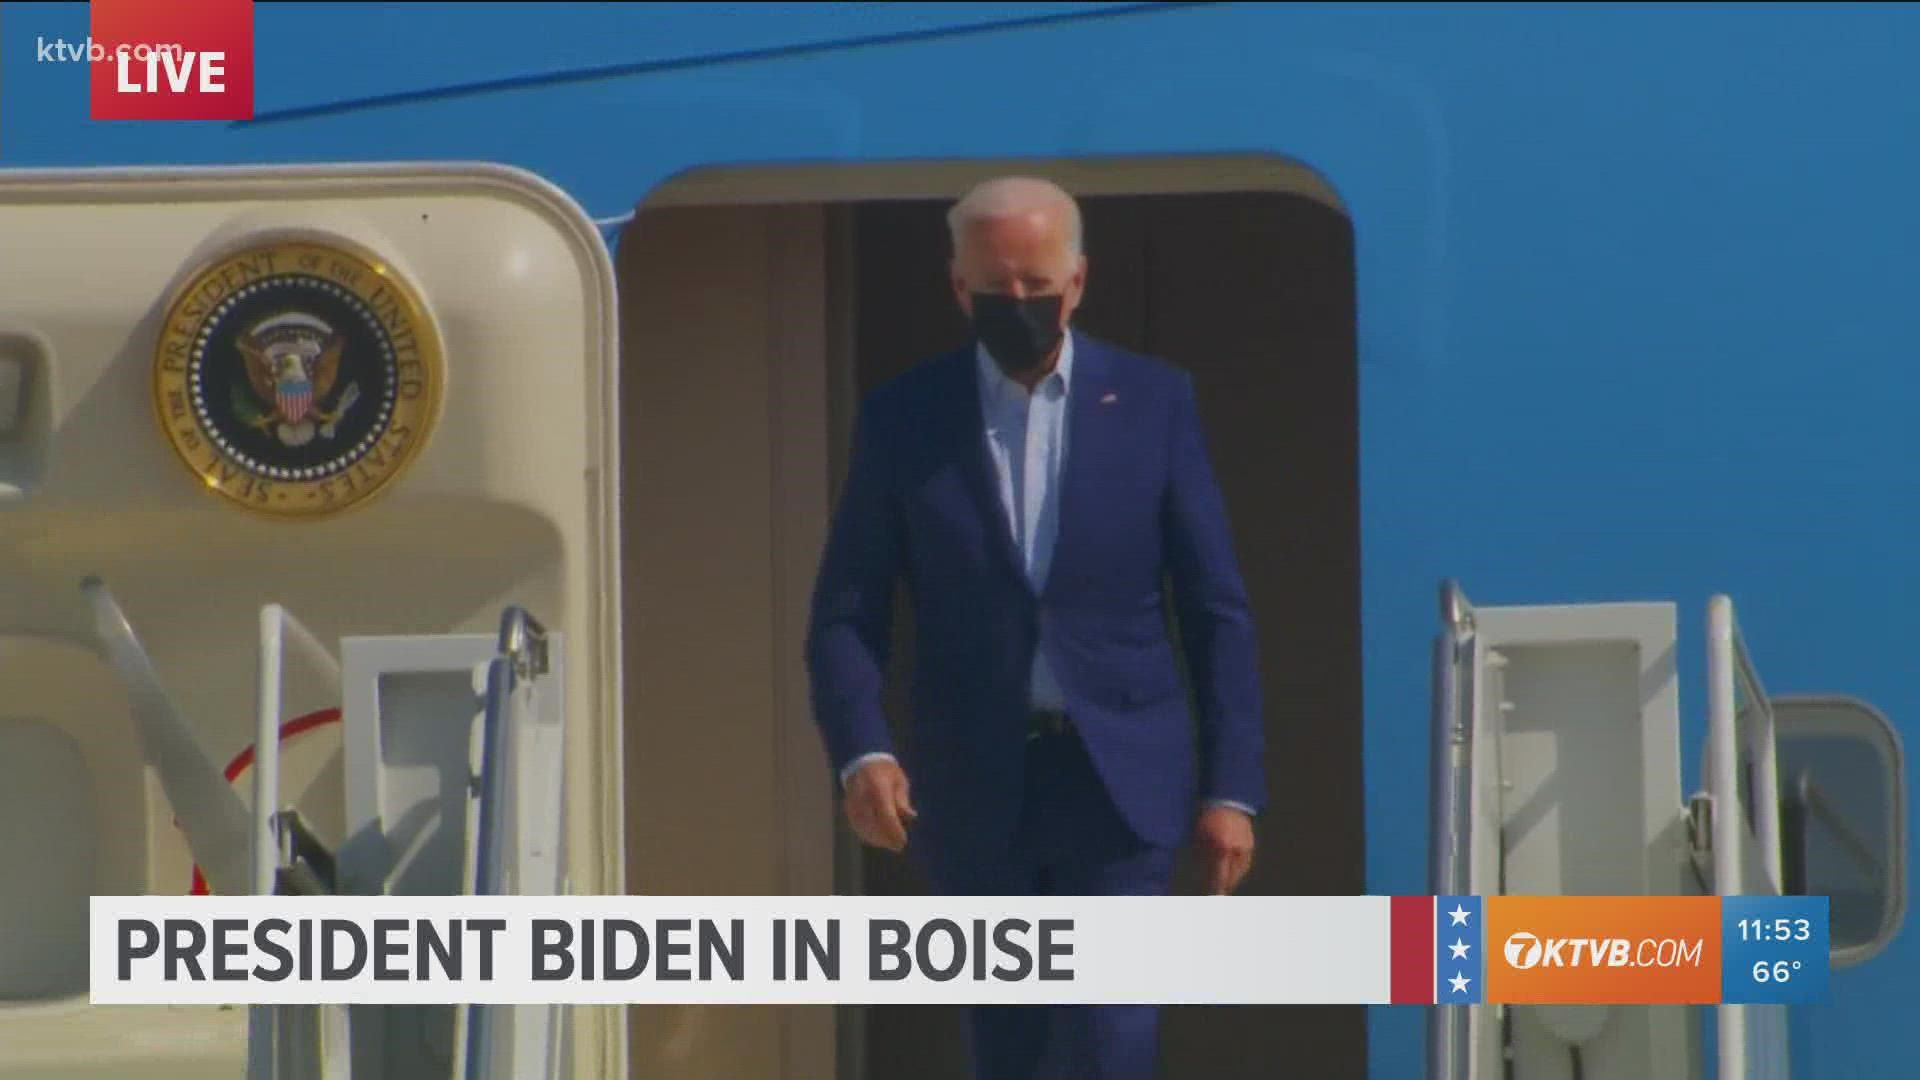 The president is expected to address wildfire prevention and the threat of climate change after touching down at the Boise Airport.